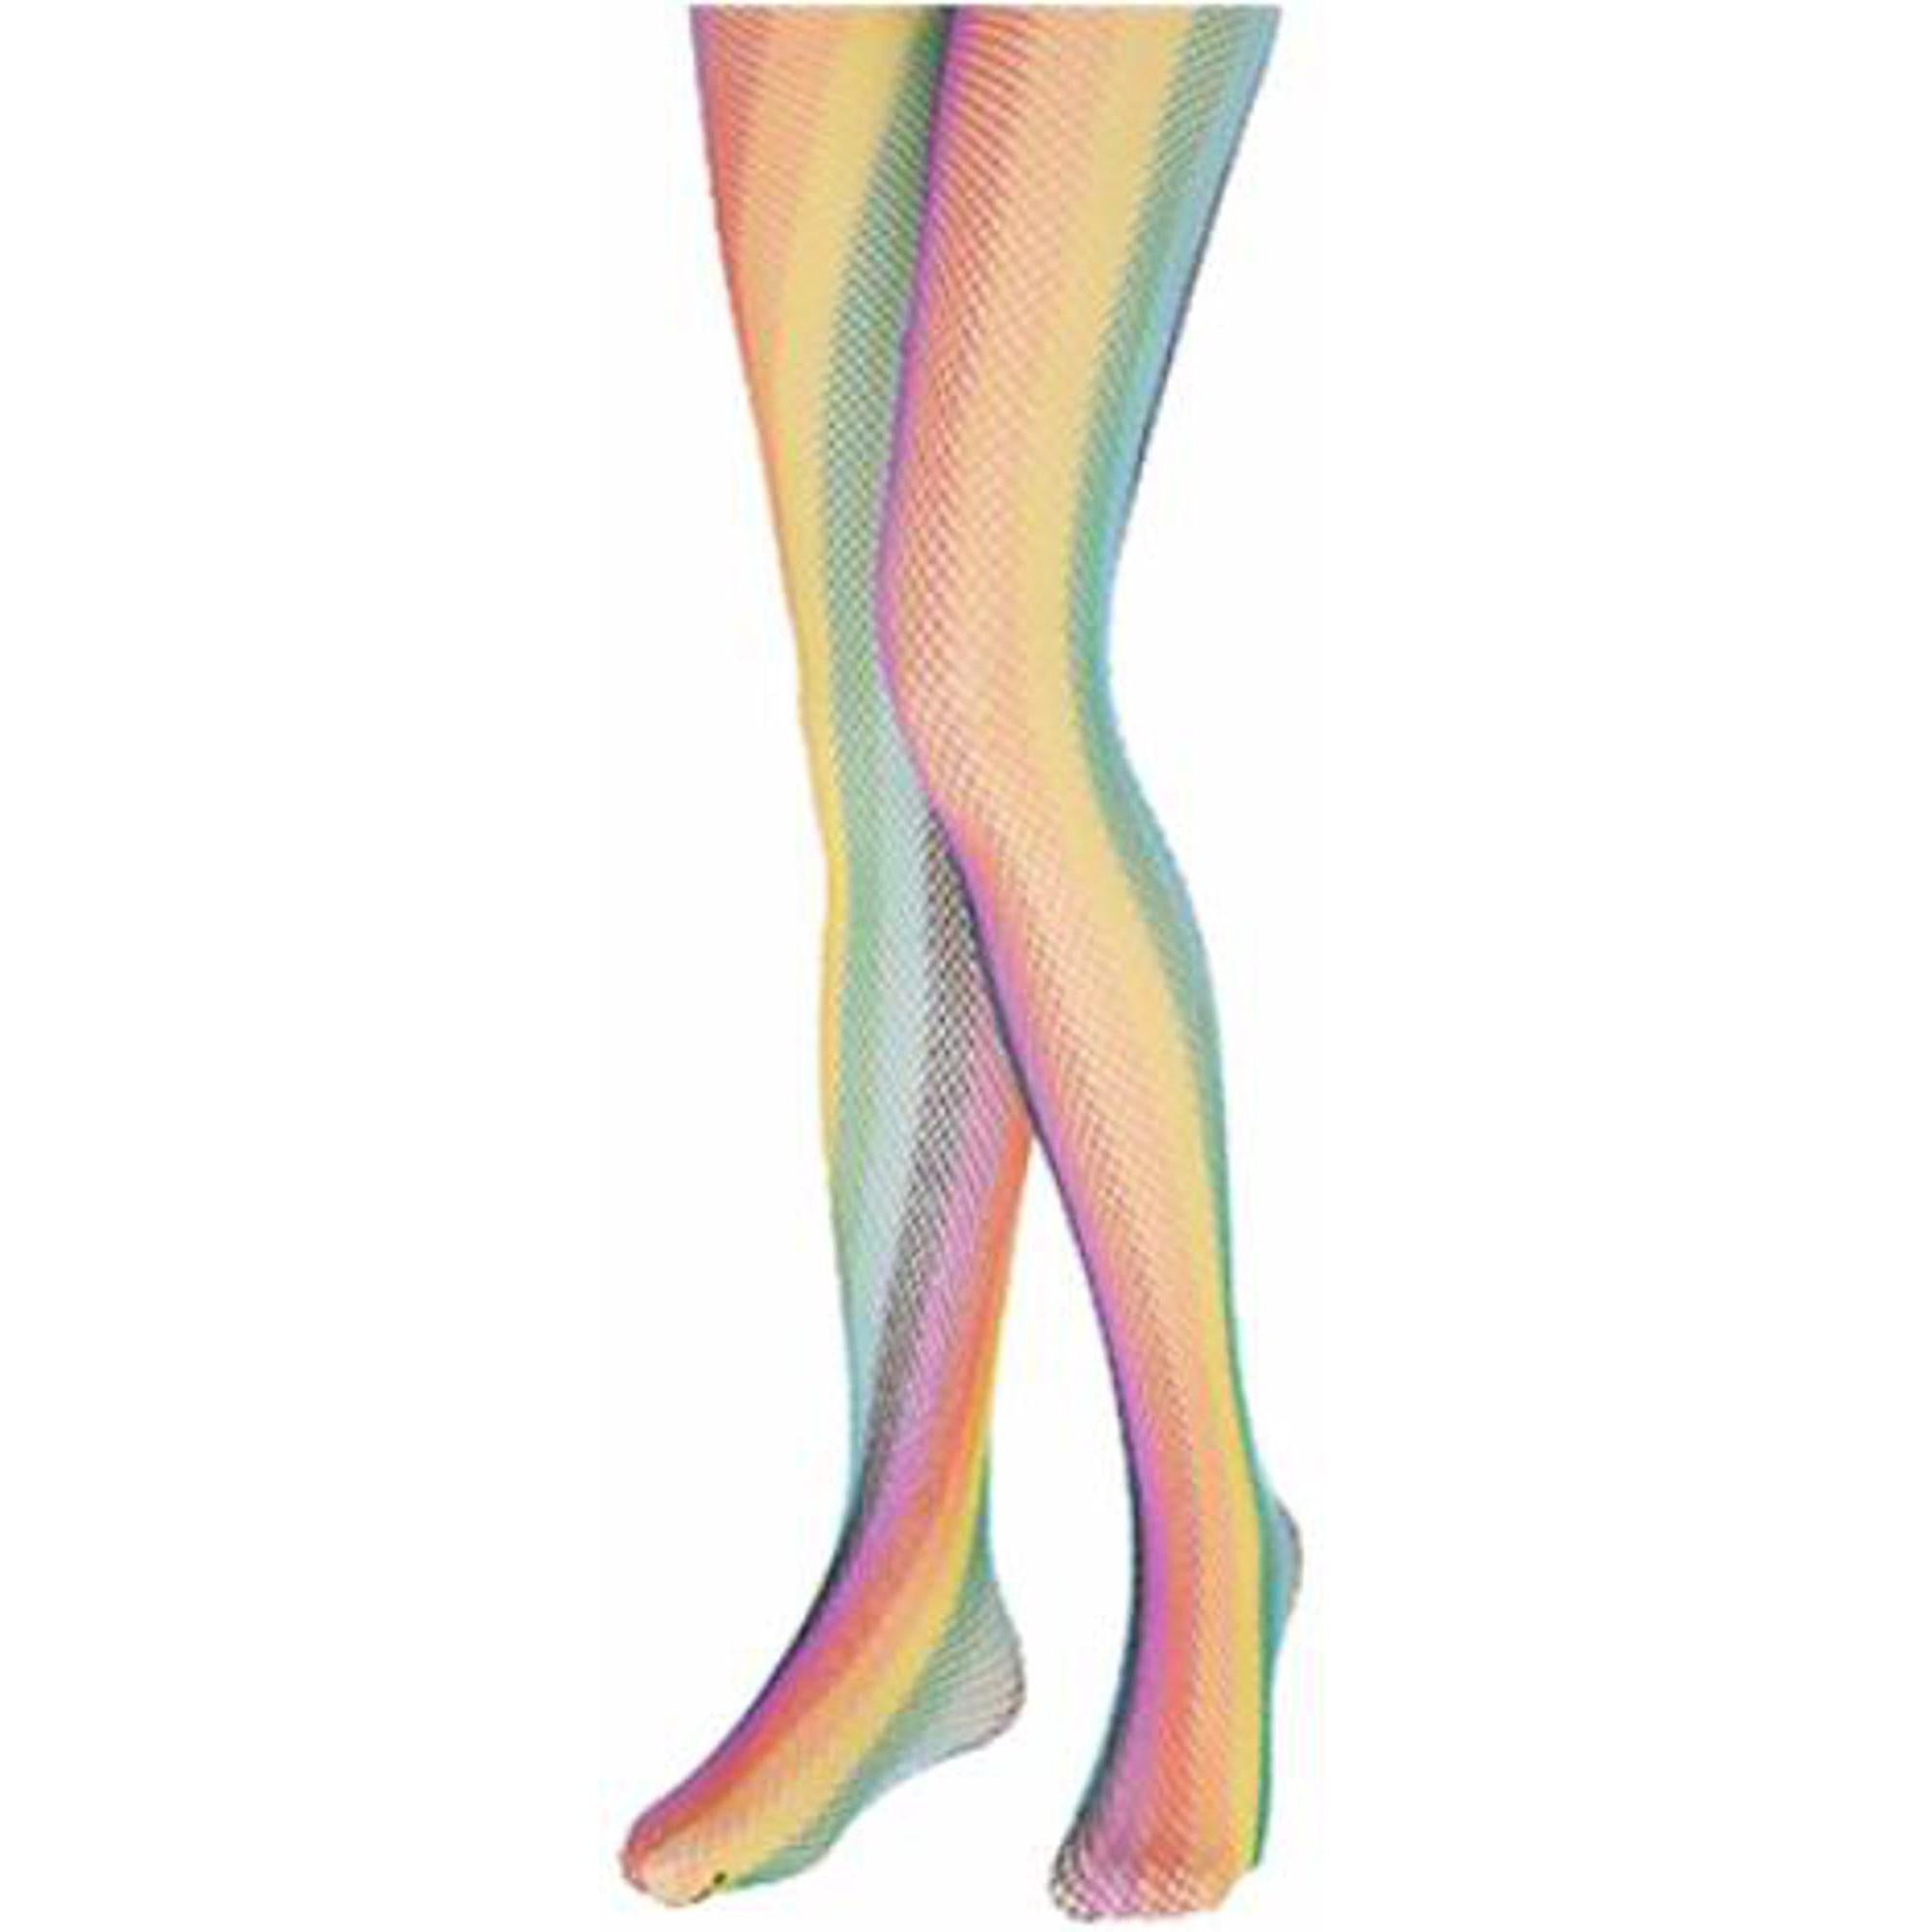 Rainbow Fishnet Tights - One Size.